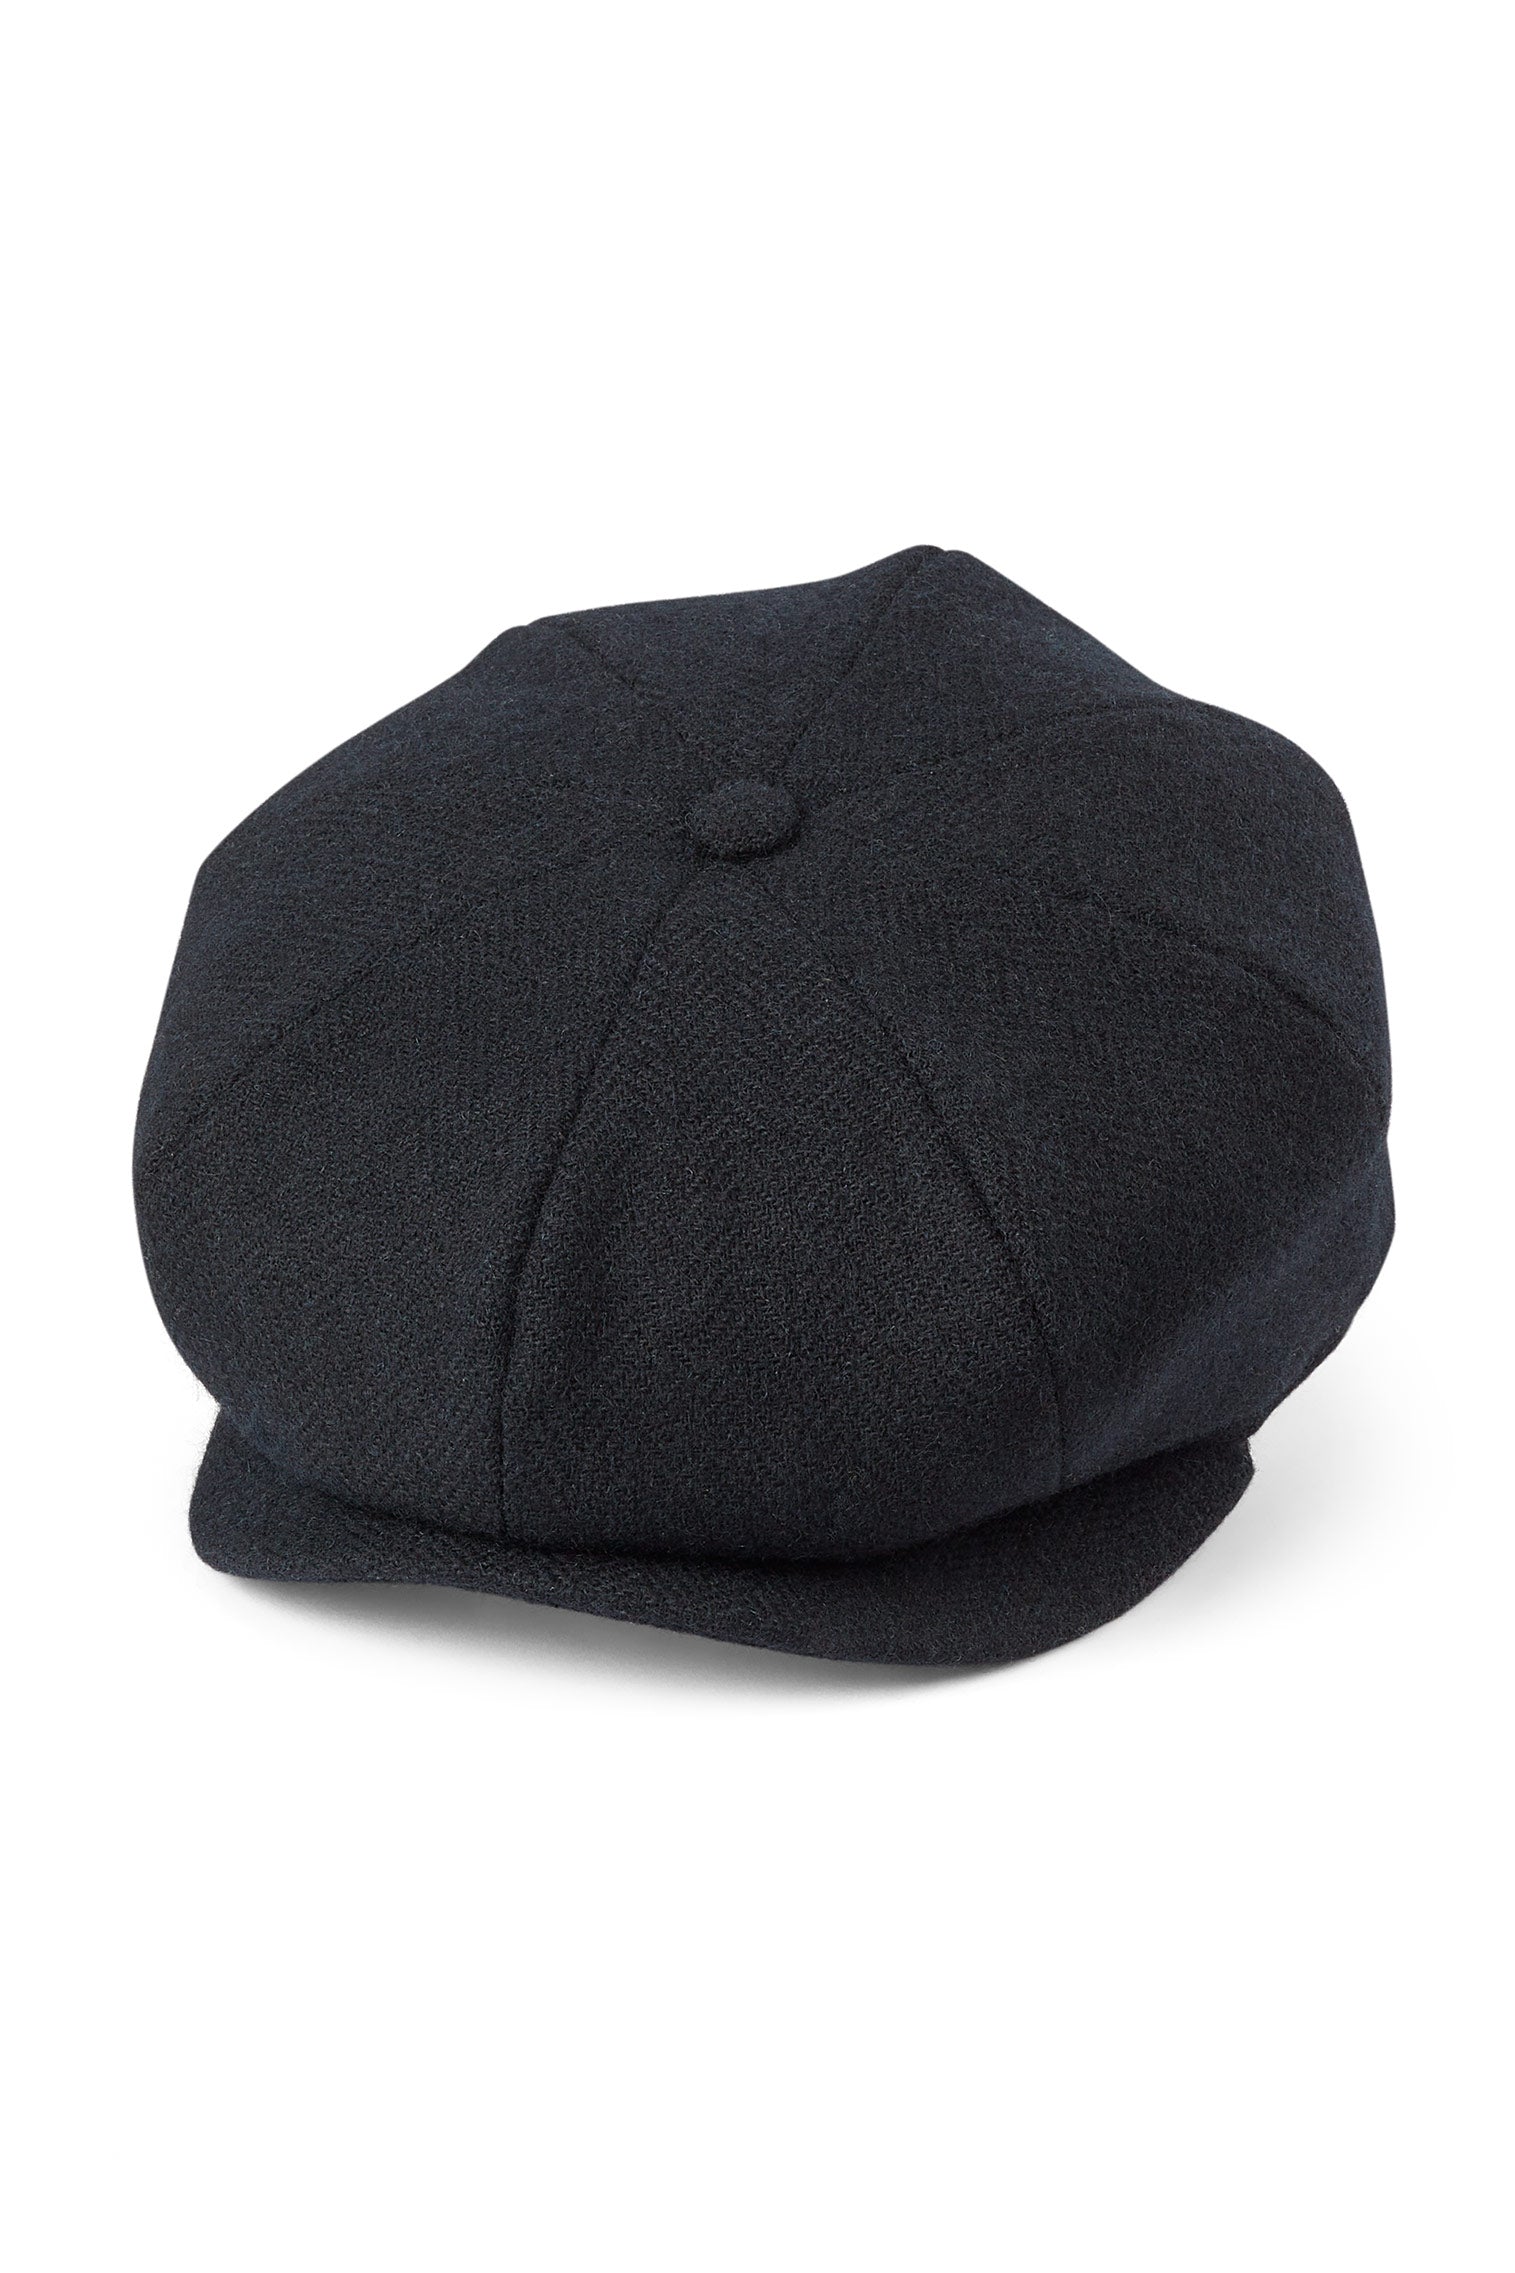 Tremelo Black Bakerboy Cap - Hats for Tall People - Lock & Co. Hatters London UK